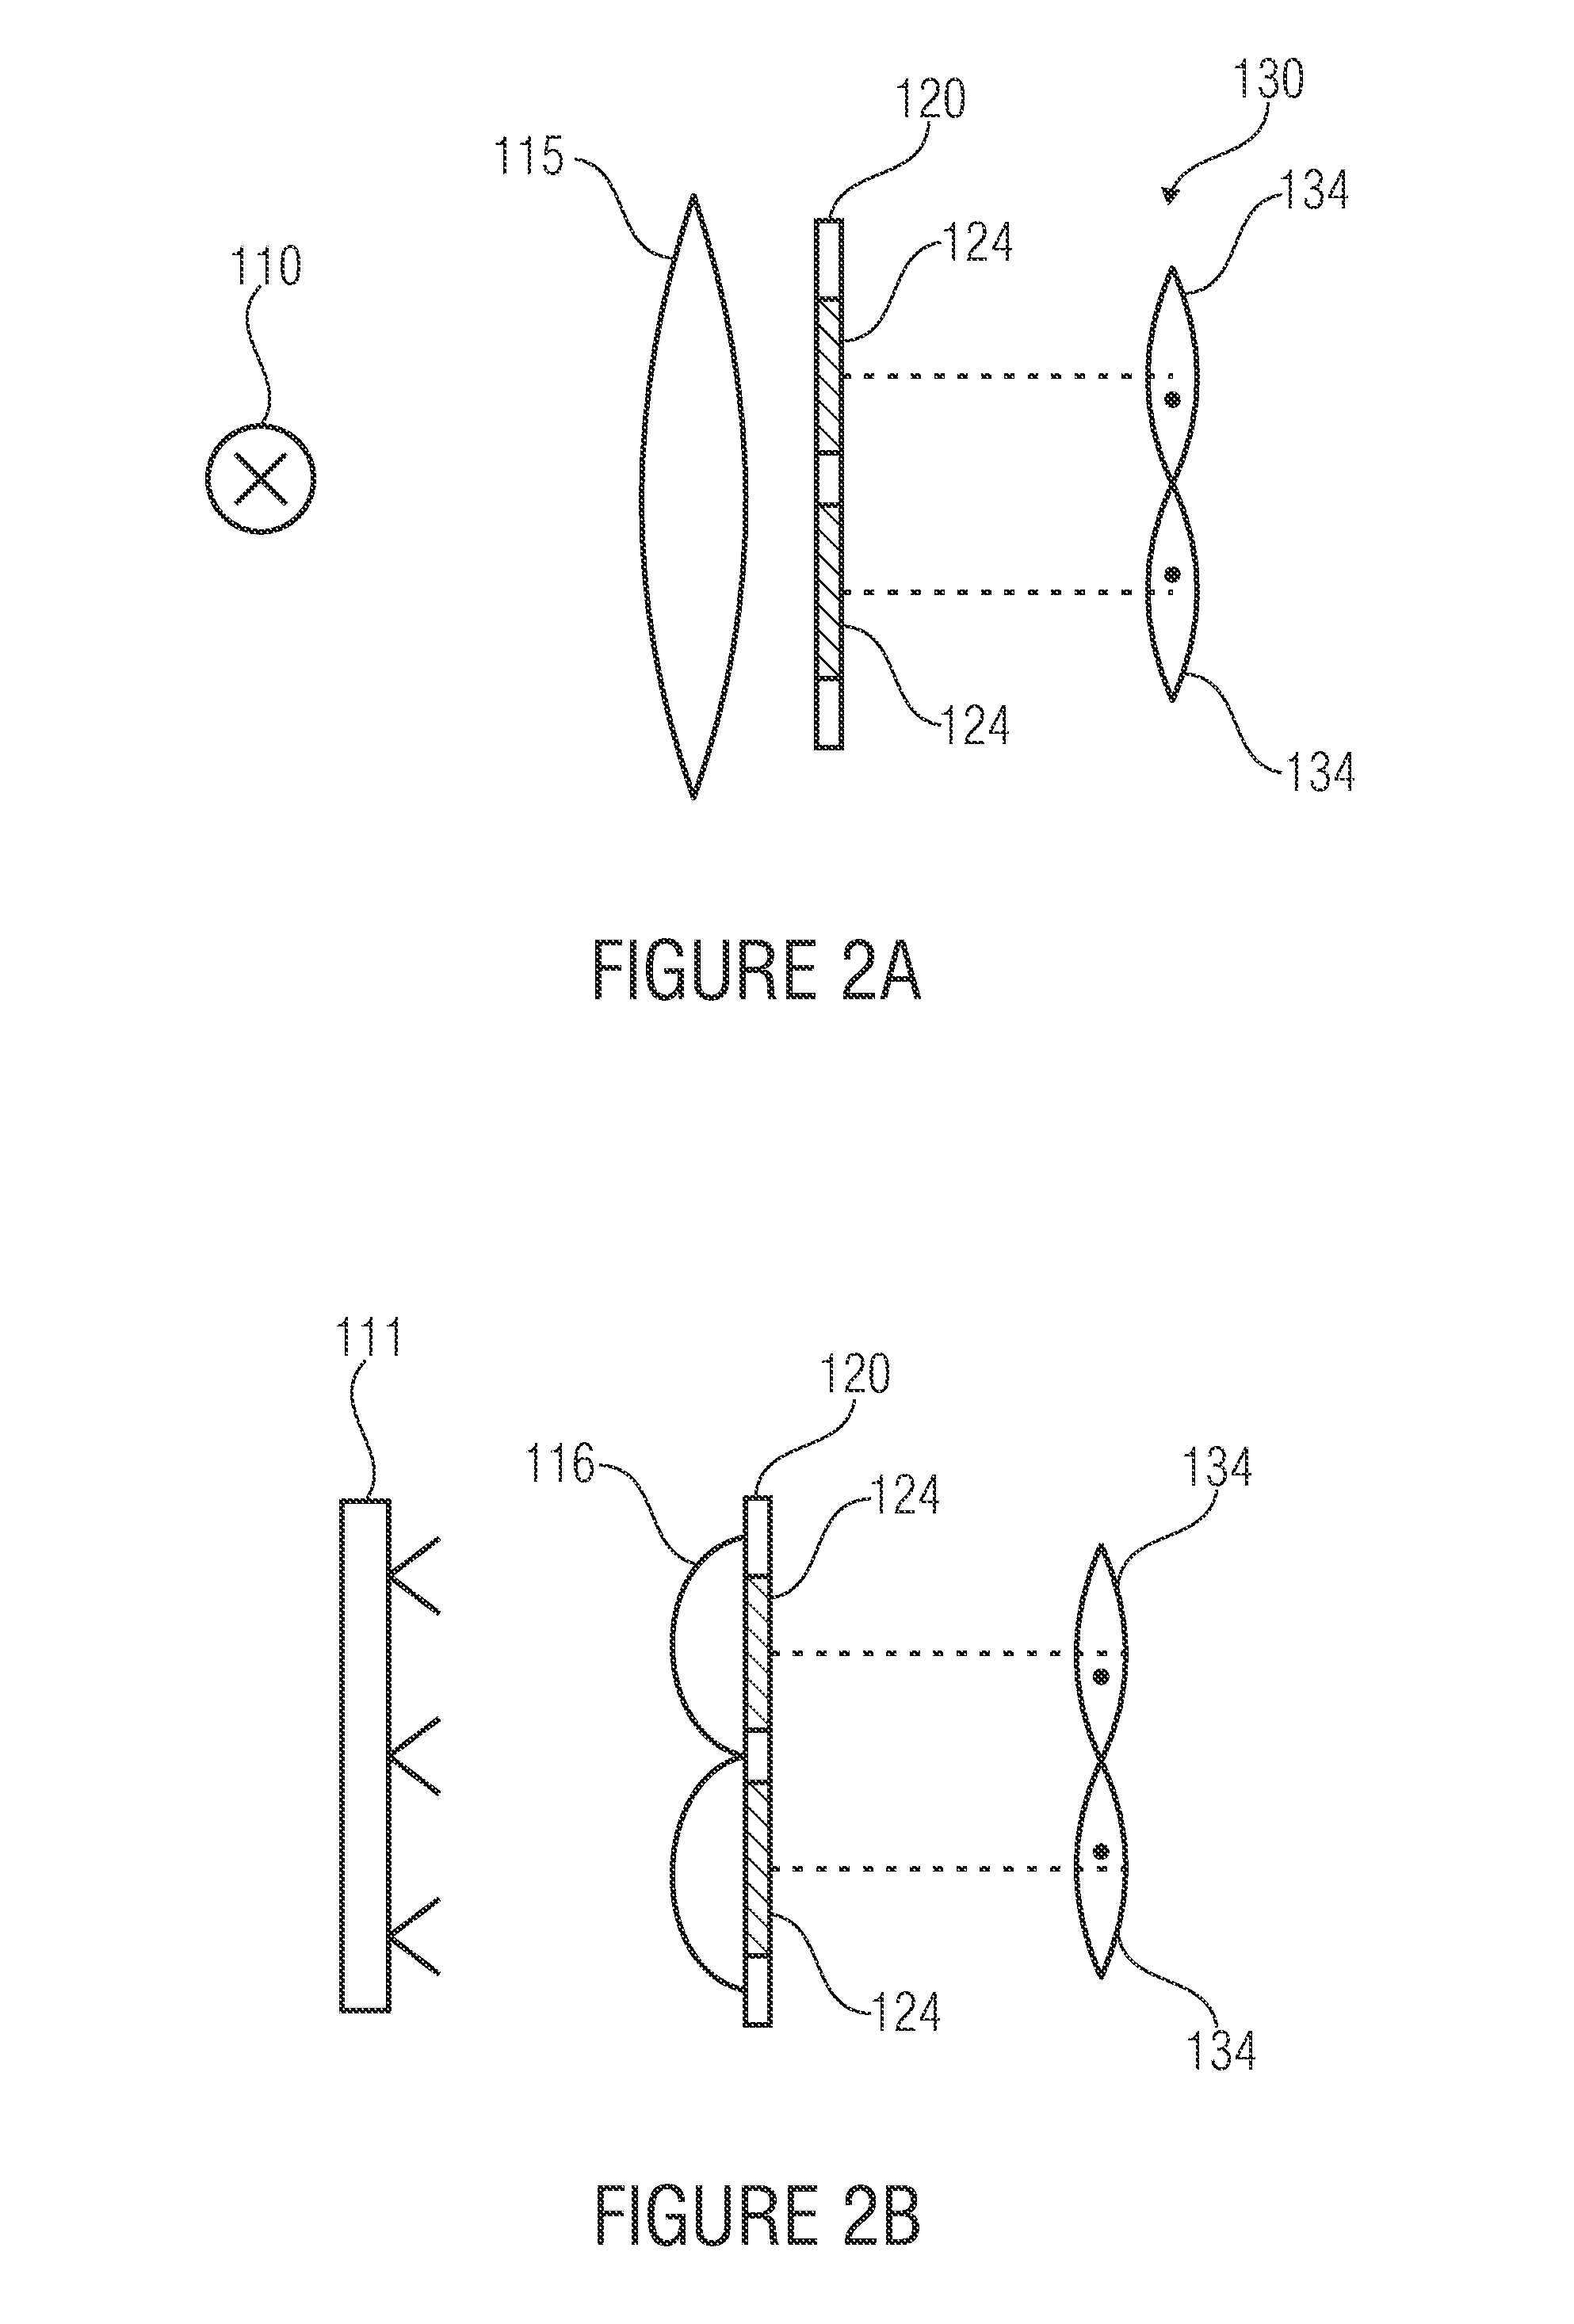 Projection display and method for displaying an overall image for projection free-form surfaces or tilted projection surfaces